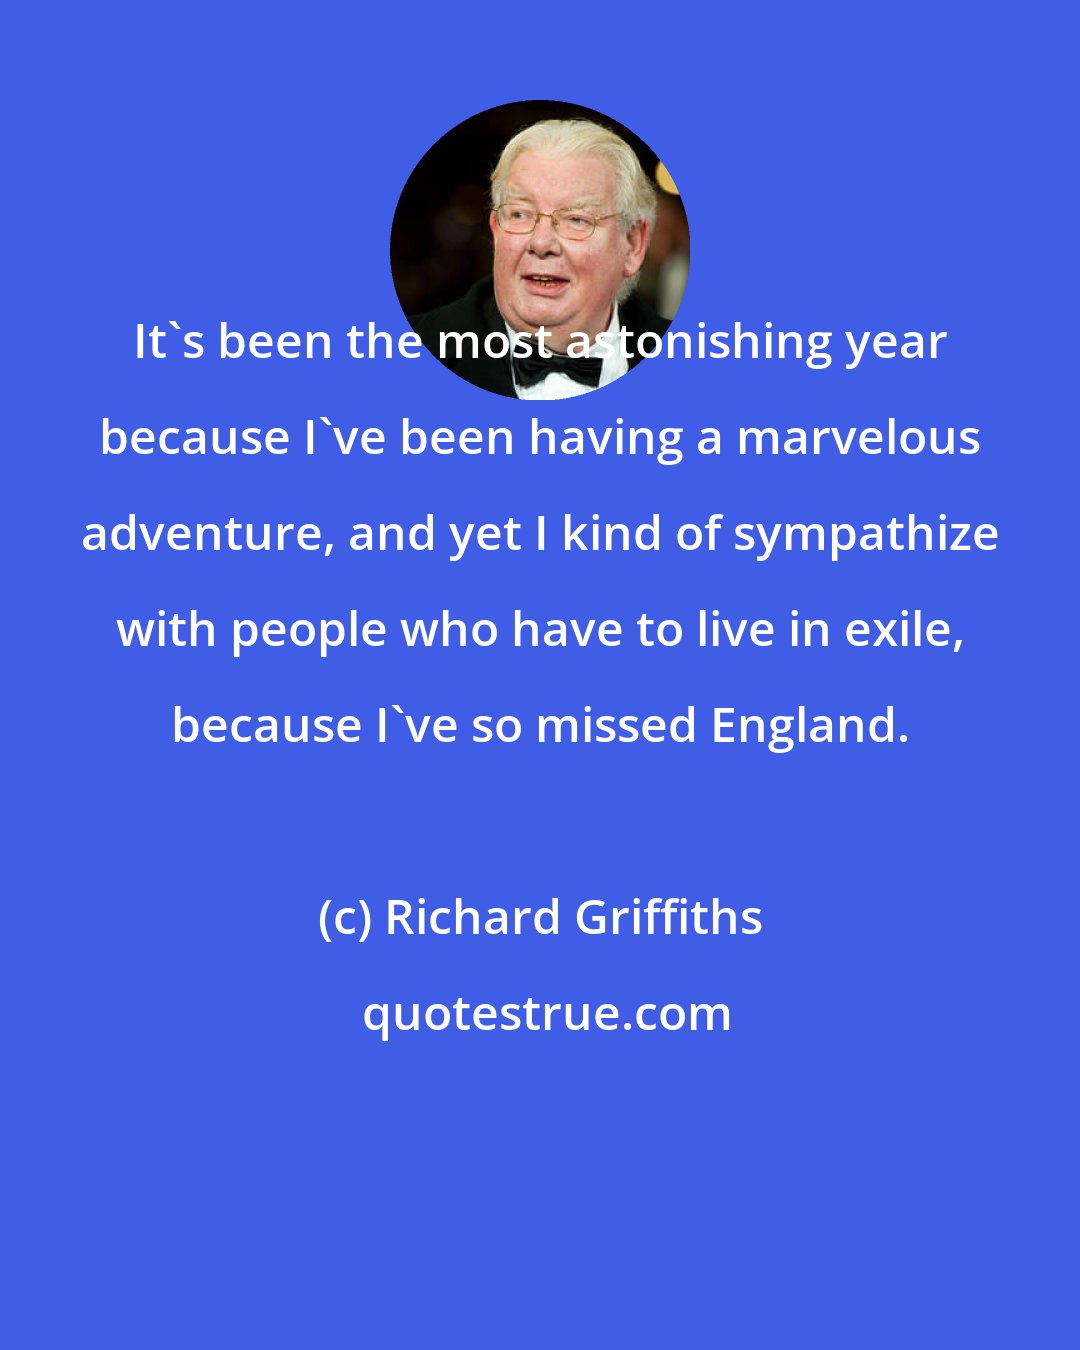 Richard Griffiths: It's been the most astonishing year because I've been having a marvelous adventure, and yet I kind of sympathize with people who have to live in exile, because I've so missed England.